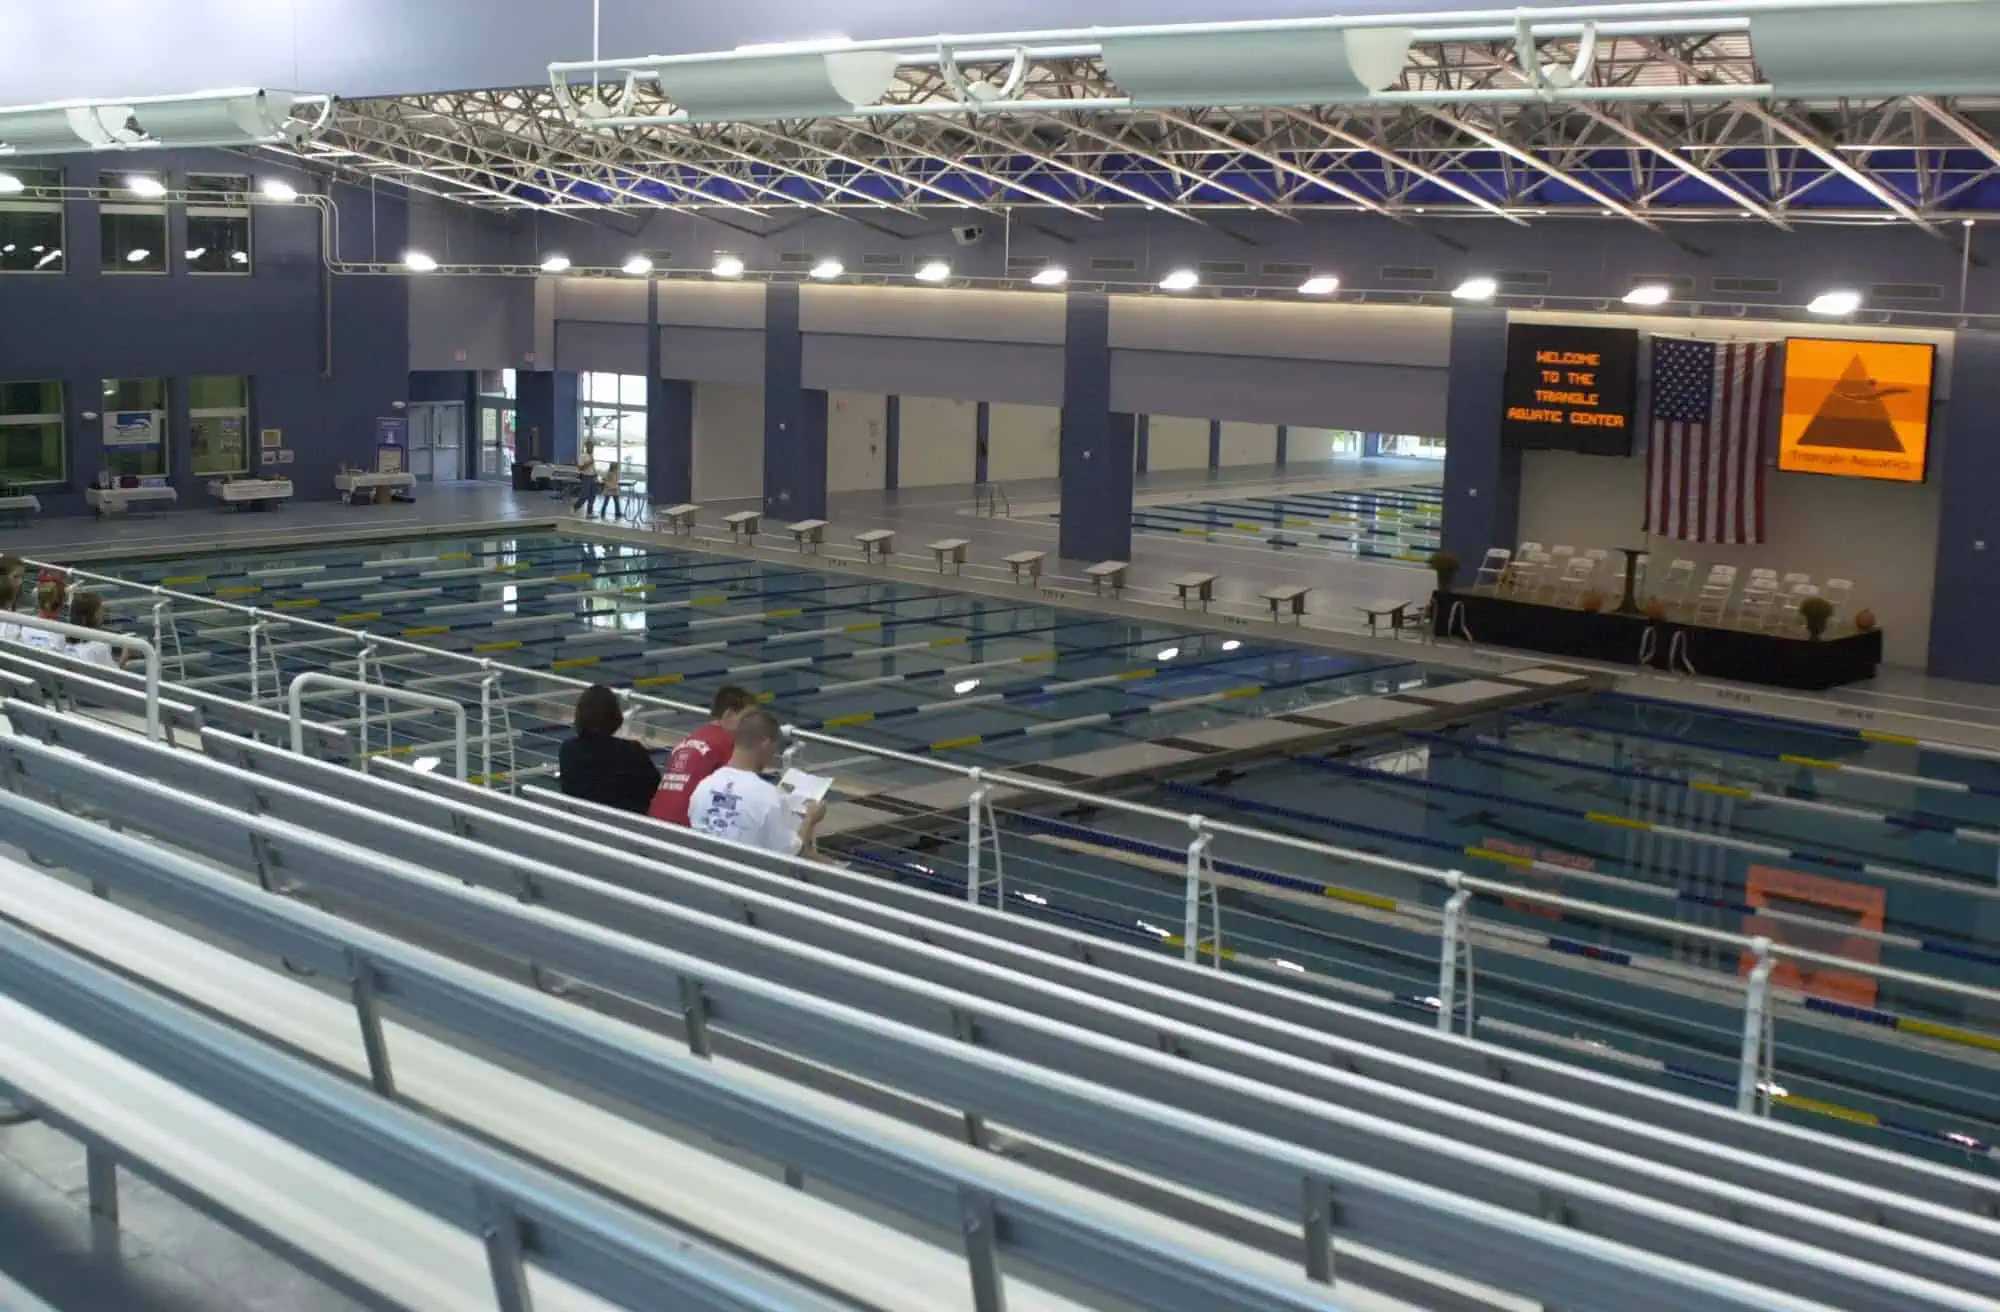 The TAC competition pool from the view of spectator seating on the day of TAC's grand opening